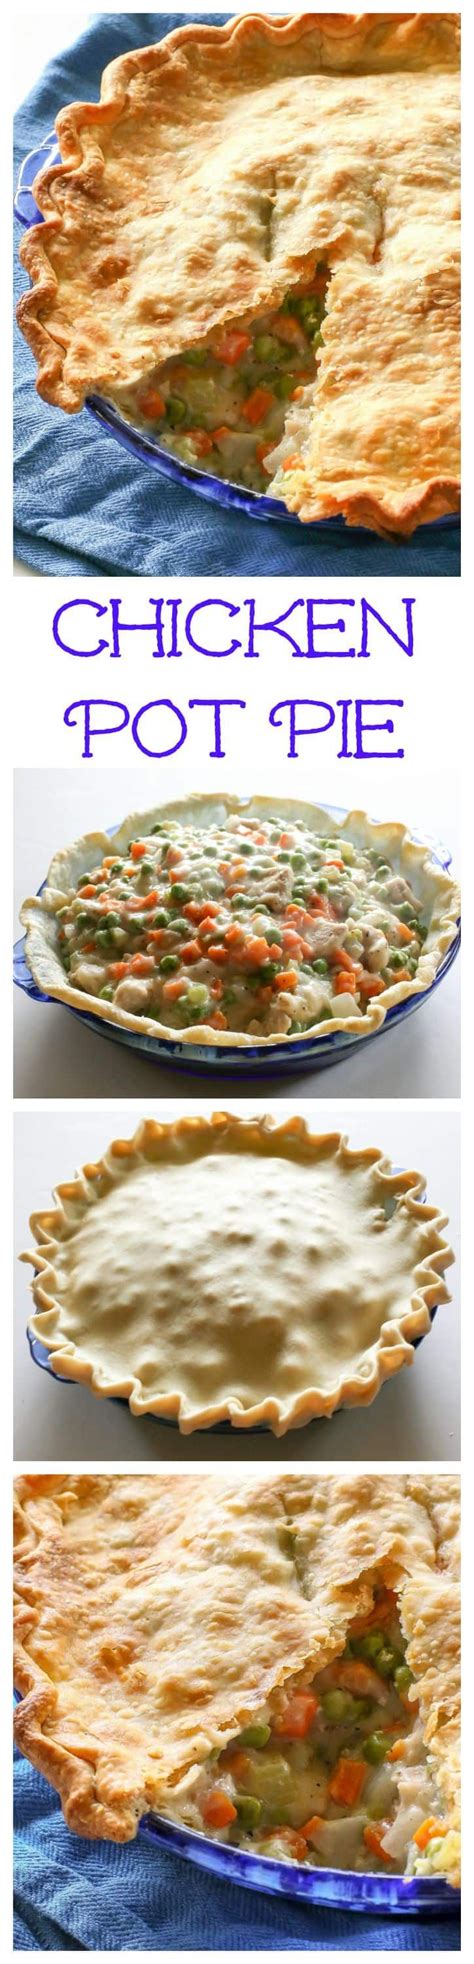 Chicken Pot Pie Recipe The Girl Who Ate Everything Recipe Recipes